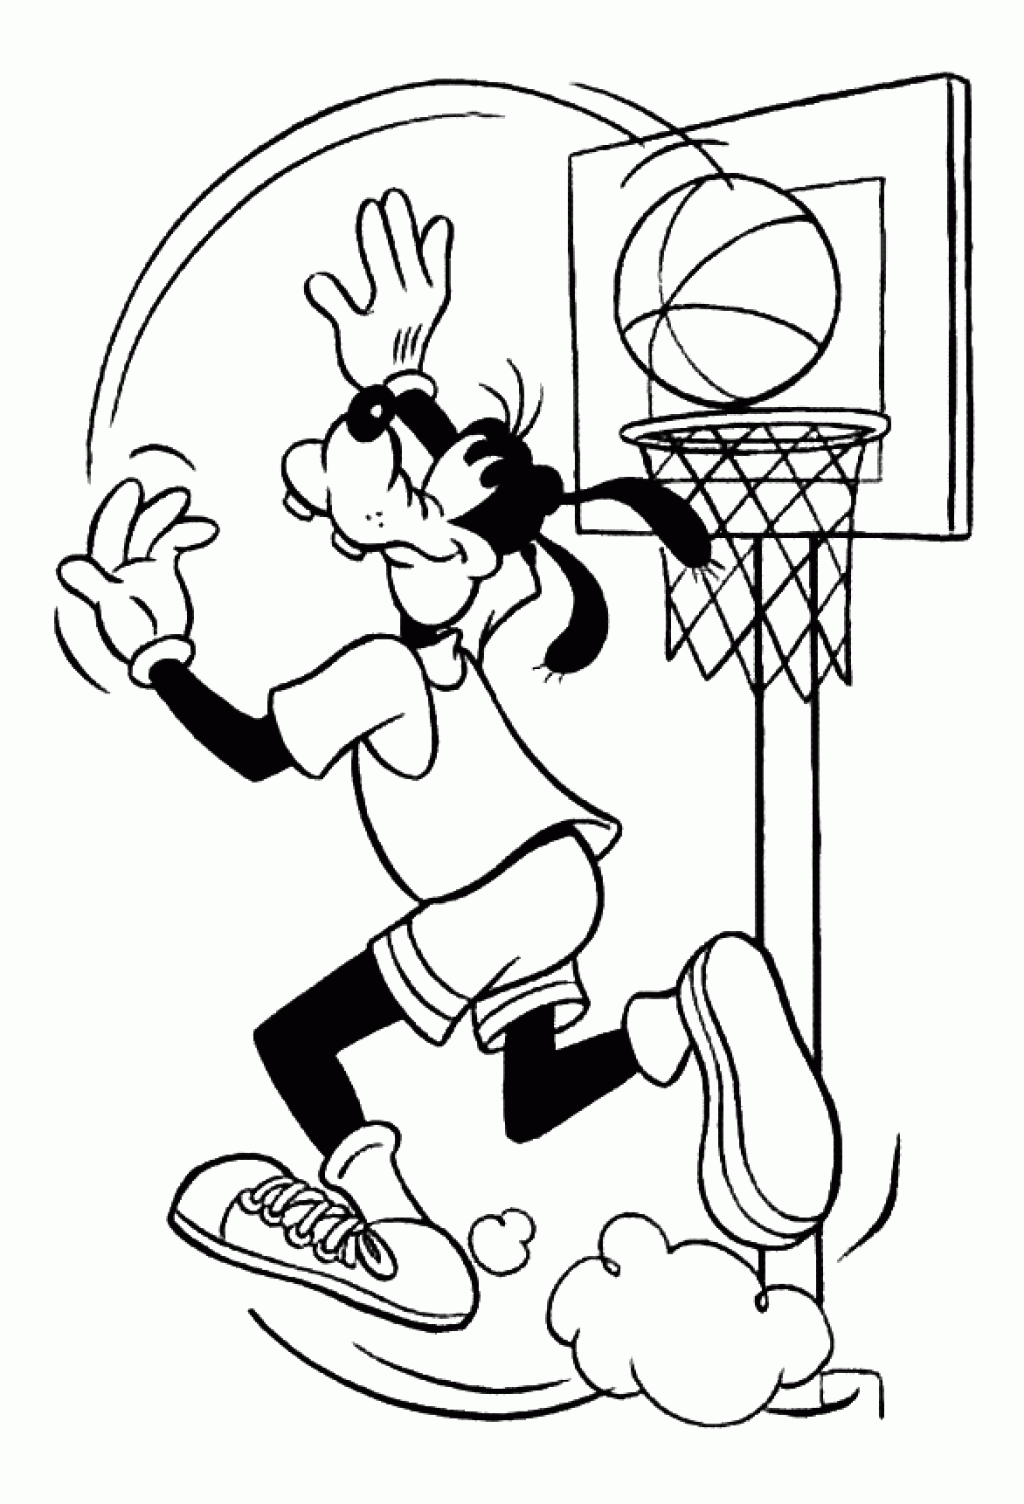 Basketball Coloring Pages For Adults - Coloring Home